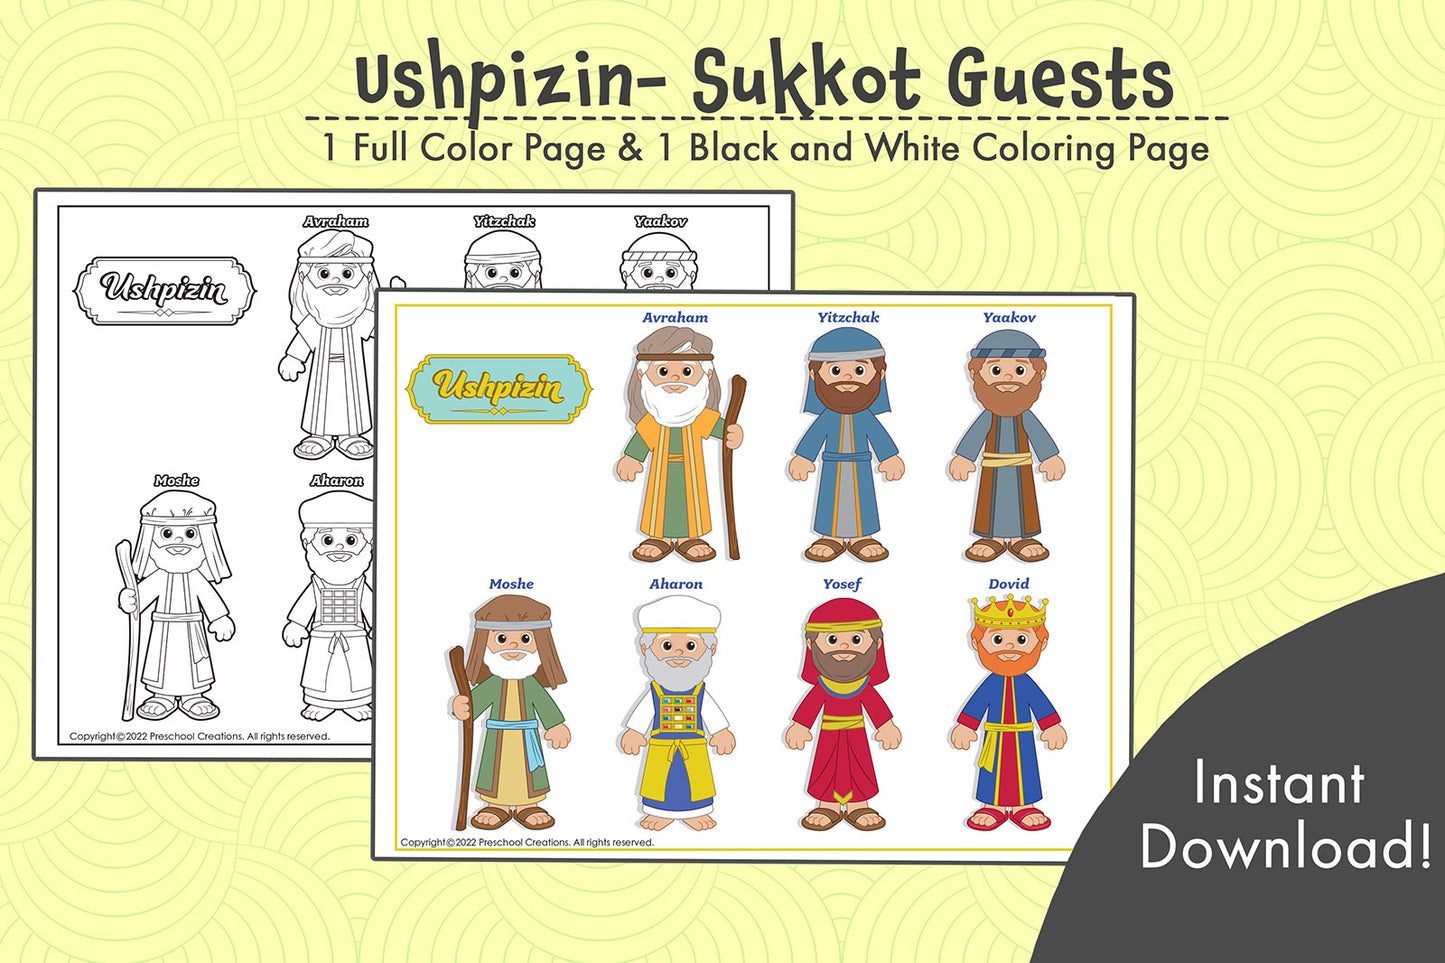 Adorable artwork to decorate your sukkah. Beautiful full color art depicting the 7 Ushpizin, sukkot guests that visit on sukkos. Black and white for kids to color in. Sukkah decor.